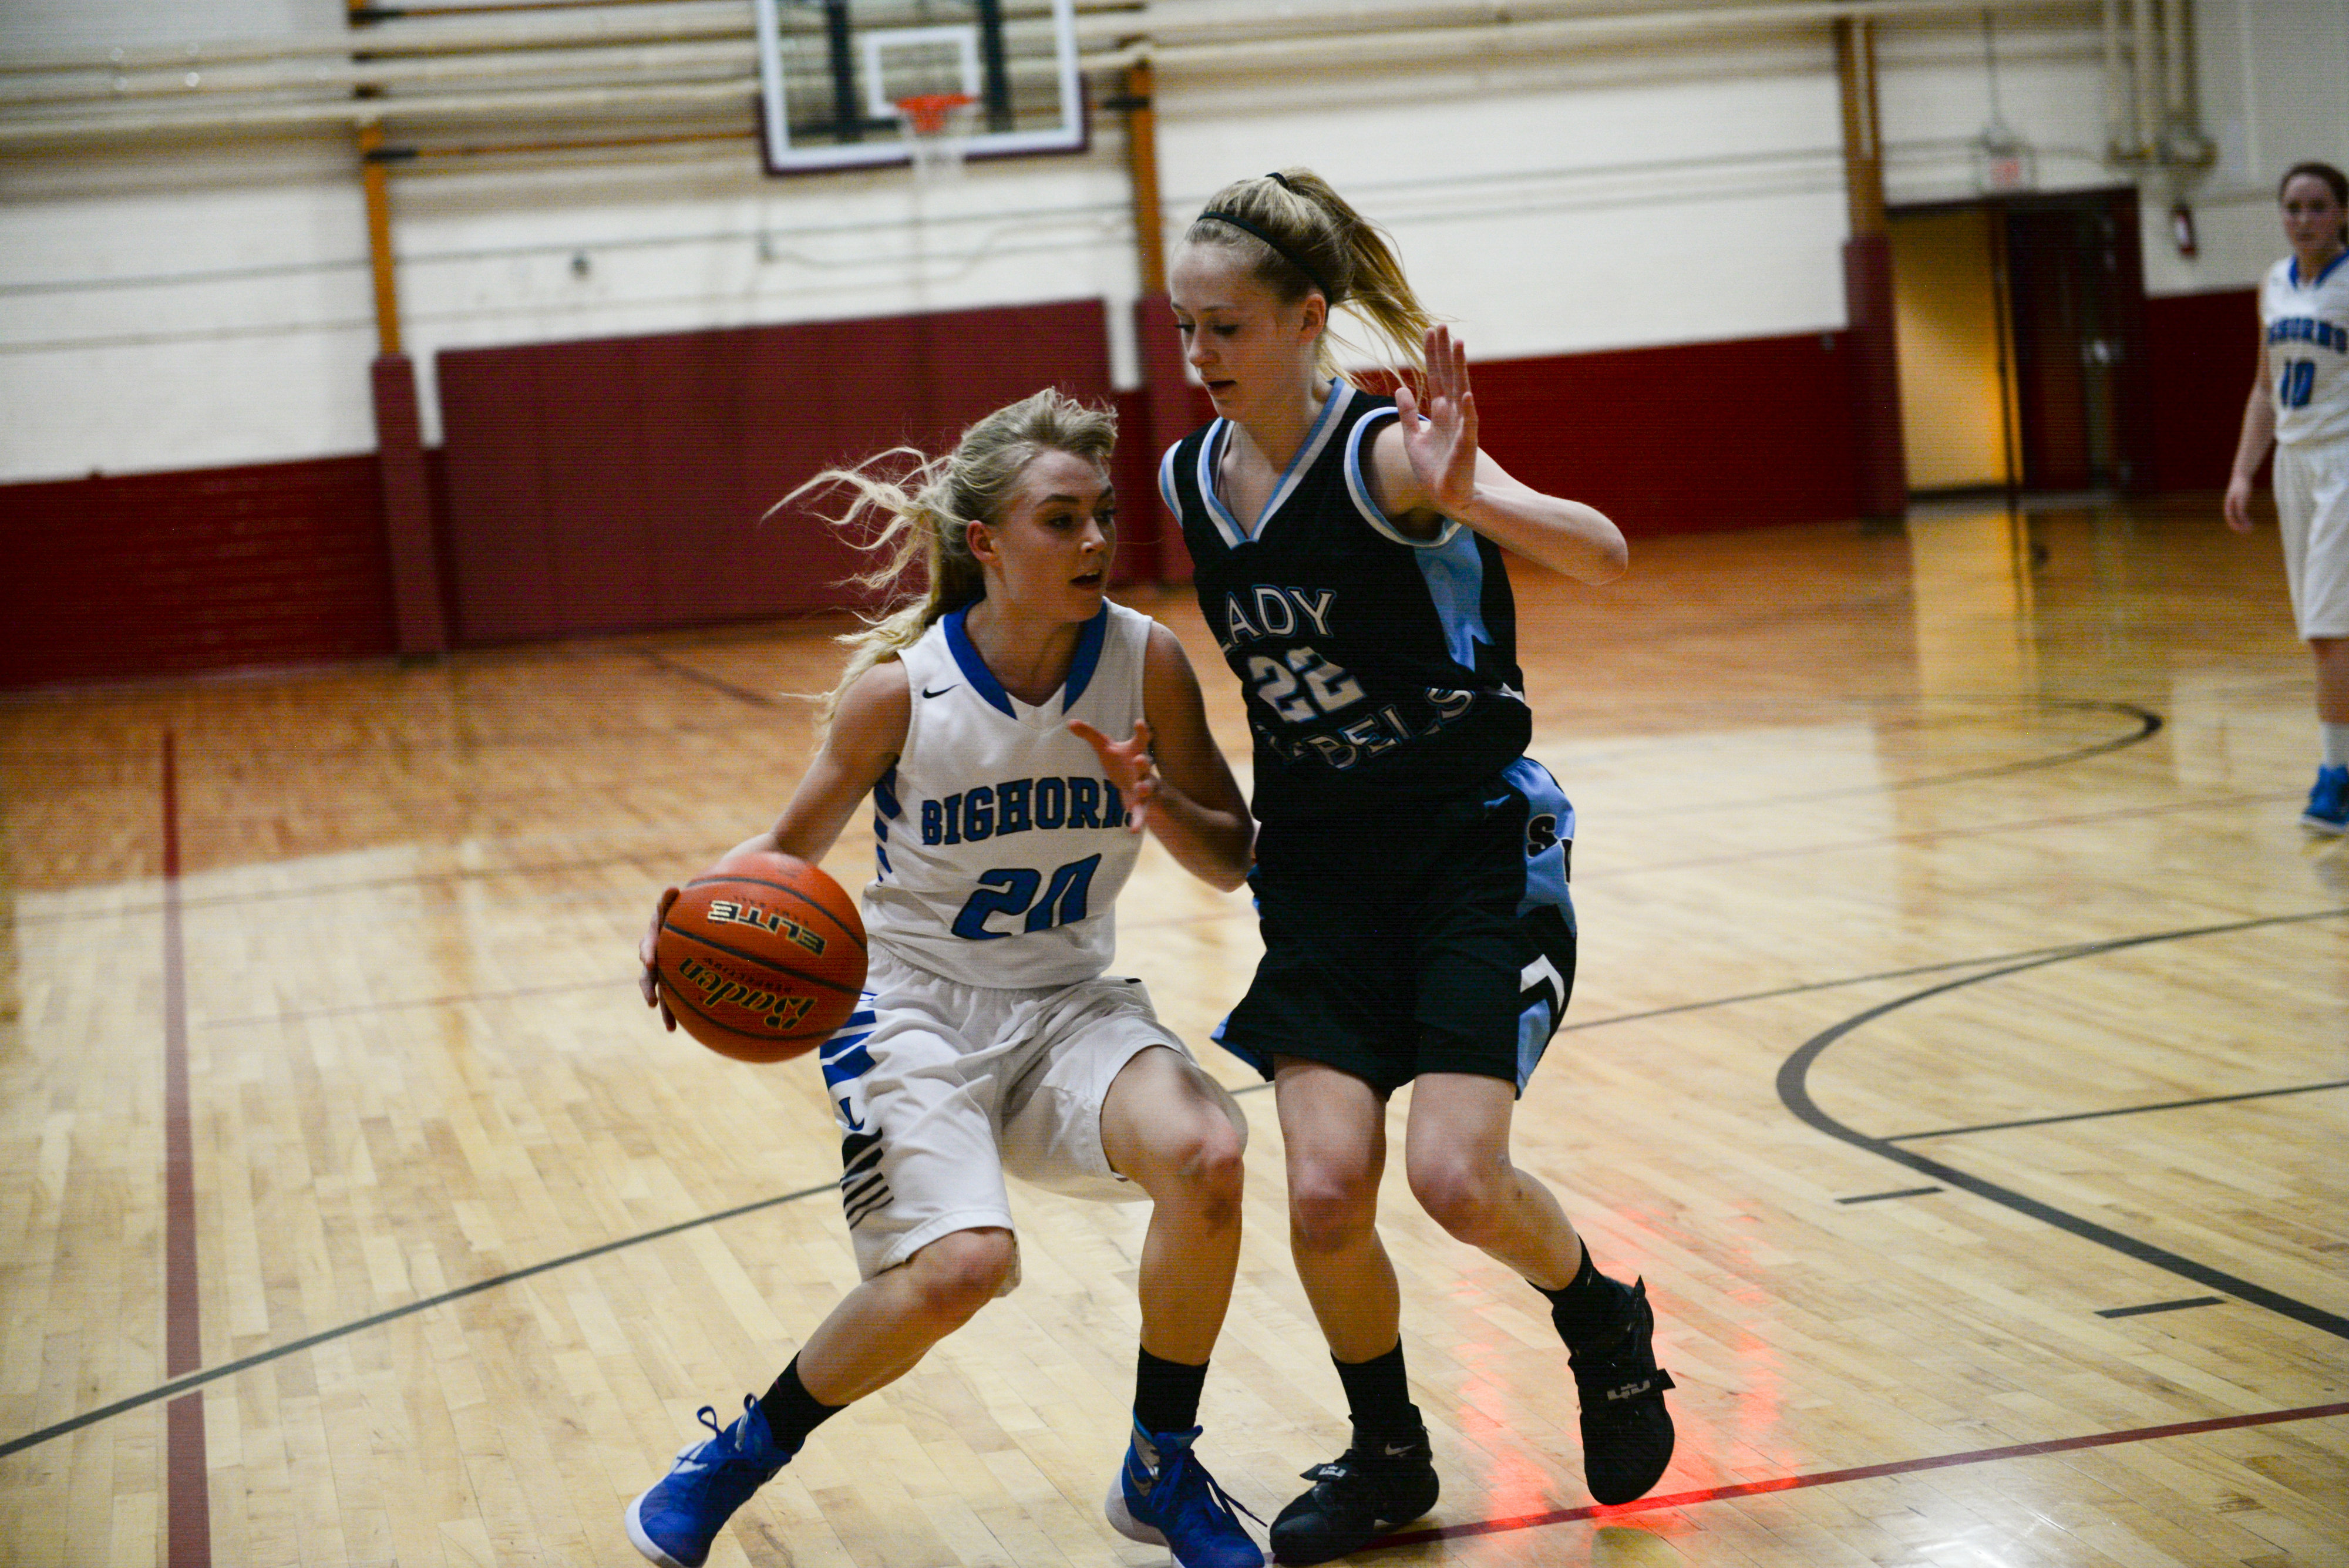 Dasha Bough scored 21 points against the Shields Valley Lady Rebels in the Lady Big Horns’ final game of the 2015-2016 season.